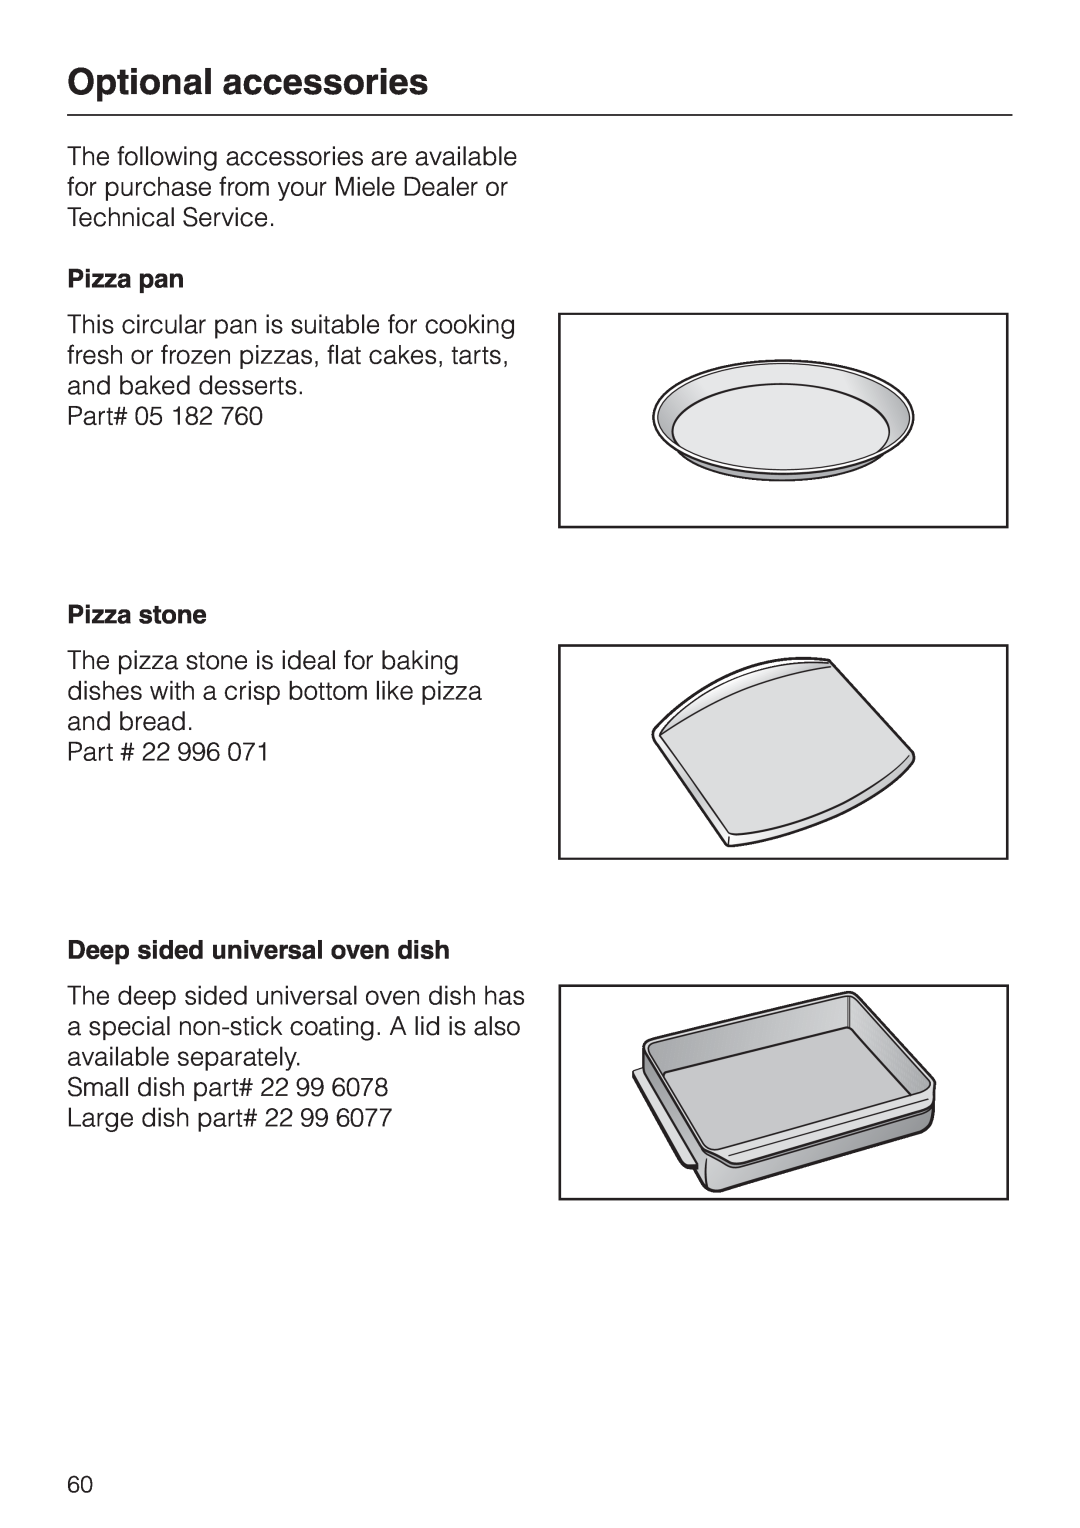 Miele H 394 manual Optional accessories, Pizza pan, Pizza stone, Deep sided universal oven dish 